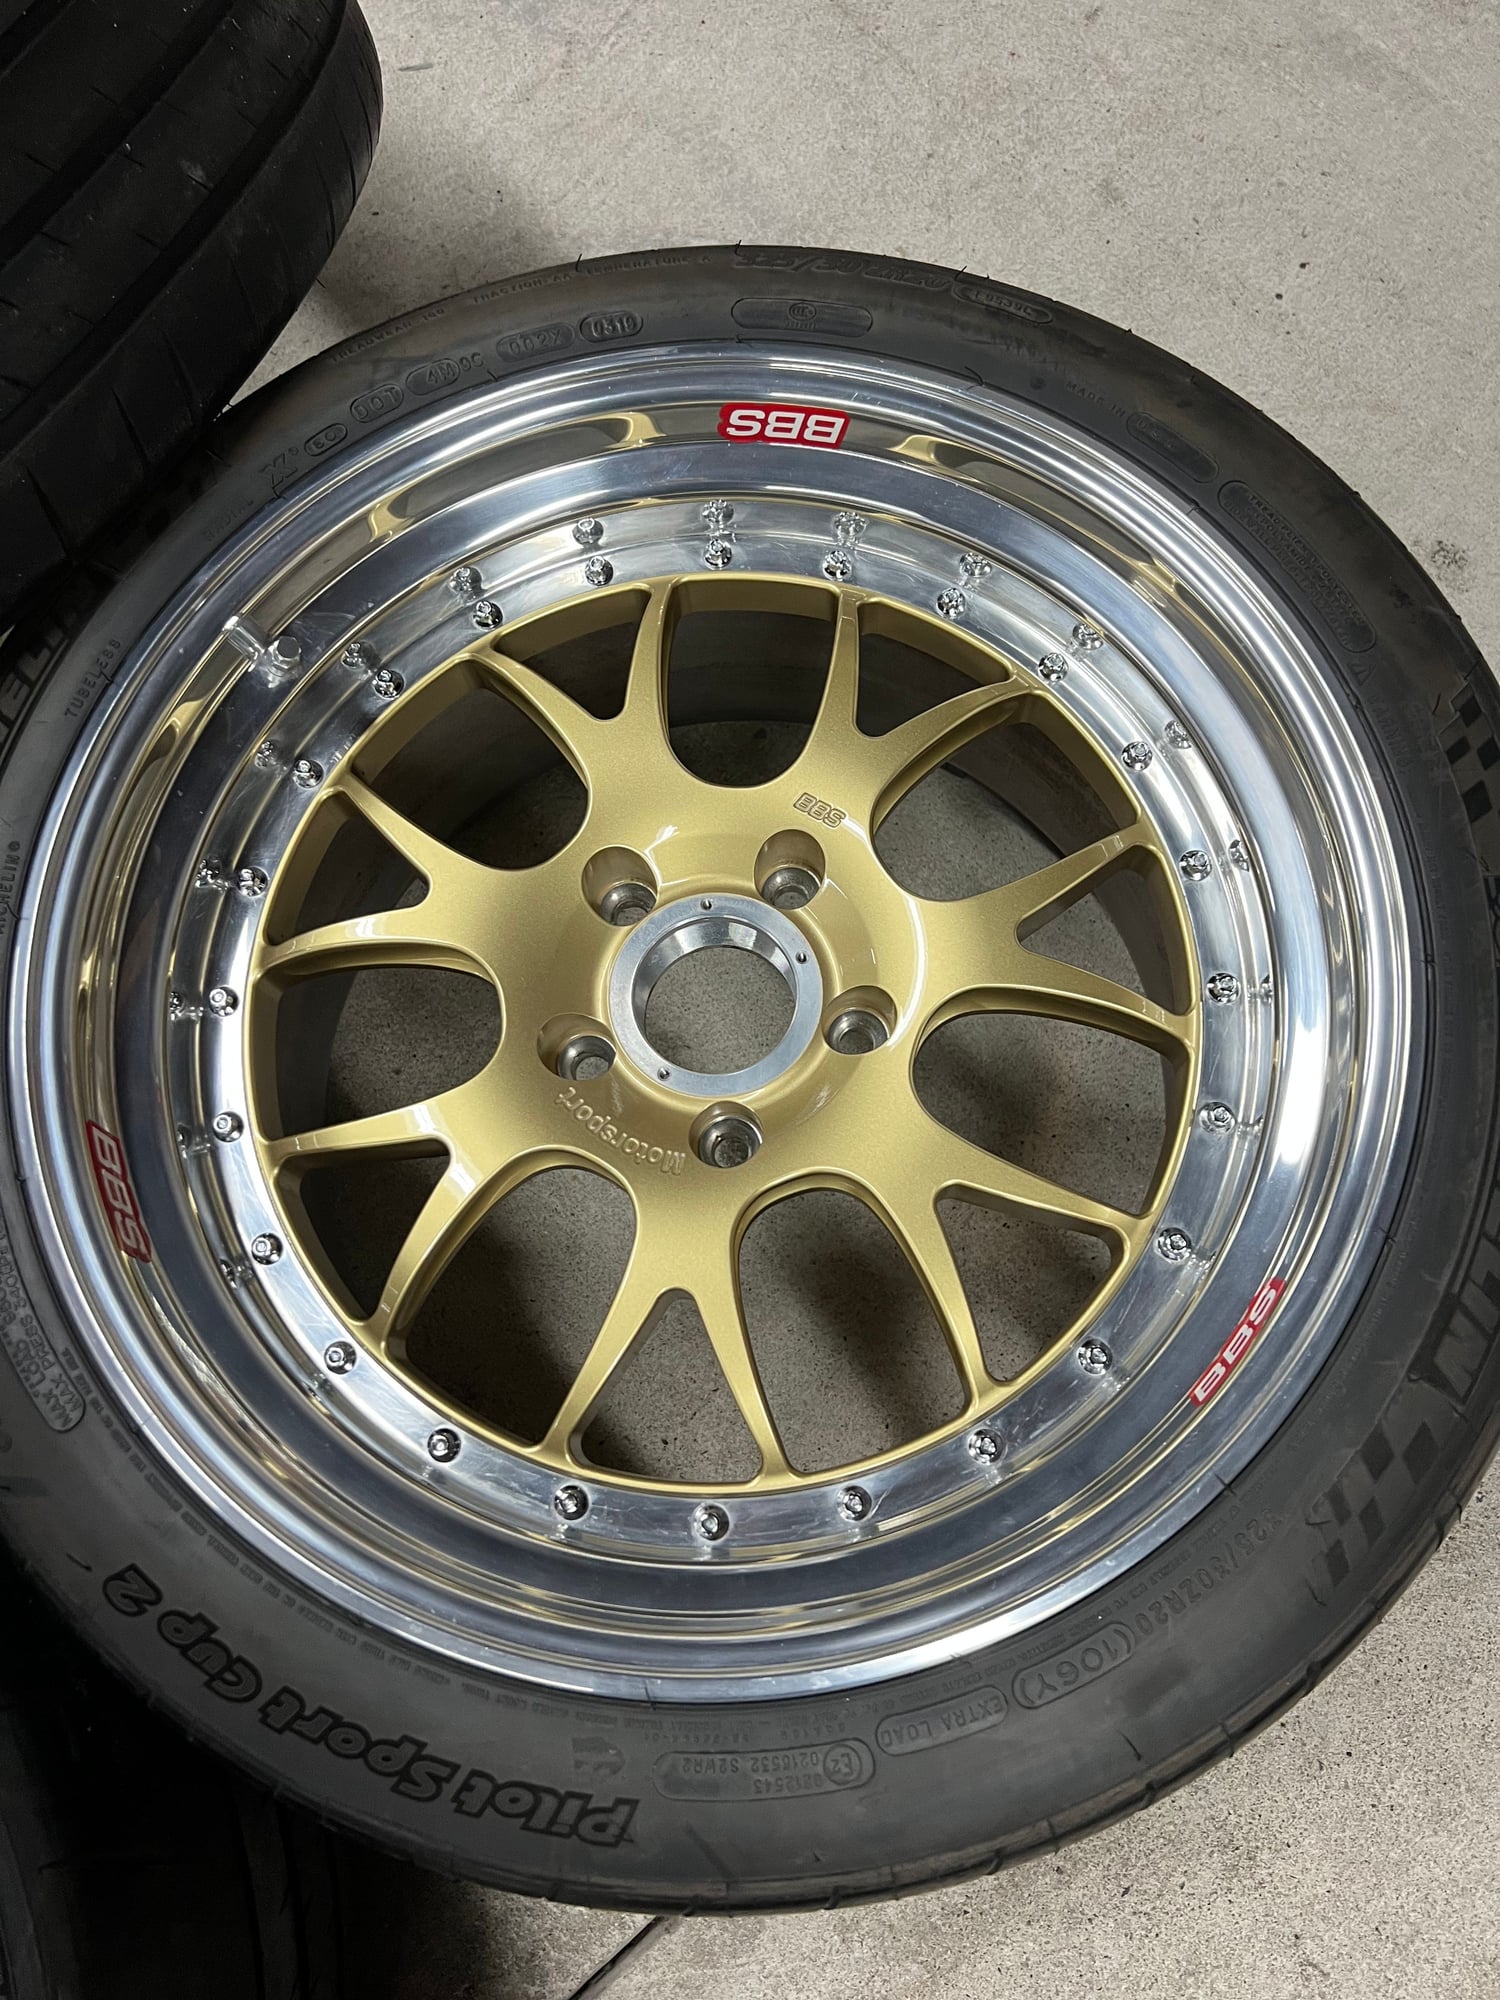 Wheels and Tires/Axles - FS: Genuine BBS / 20 inch E80 wheels / 5 Lug / Michelin Sport Cup 2 / 991 fitment - Used - -1 to 2025  All Models - Lansdale, PA 19446, United States